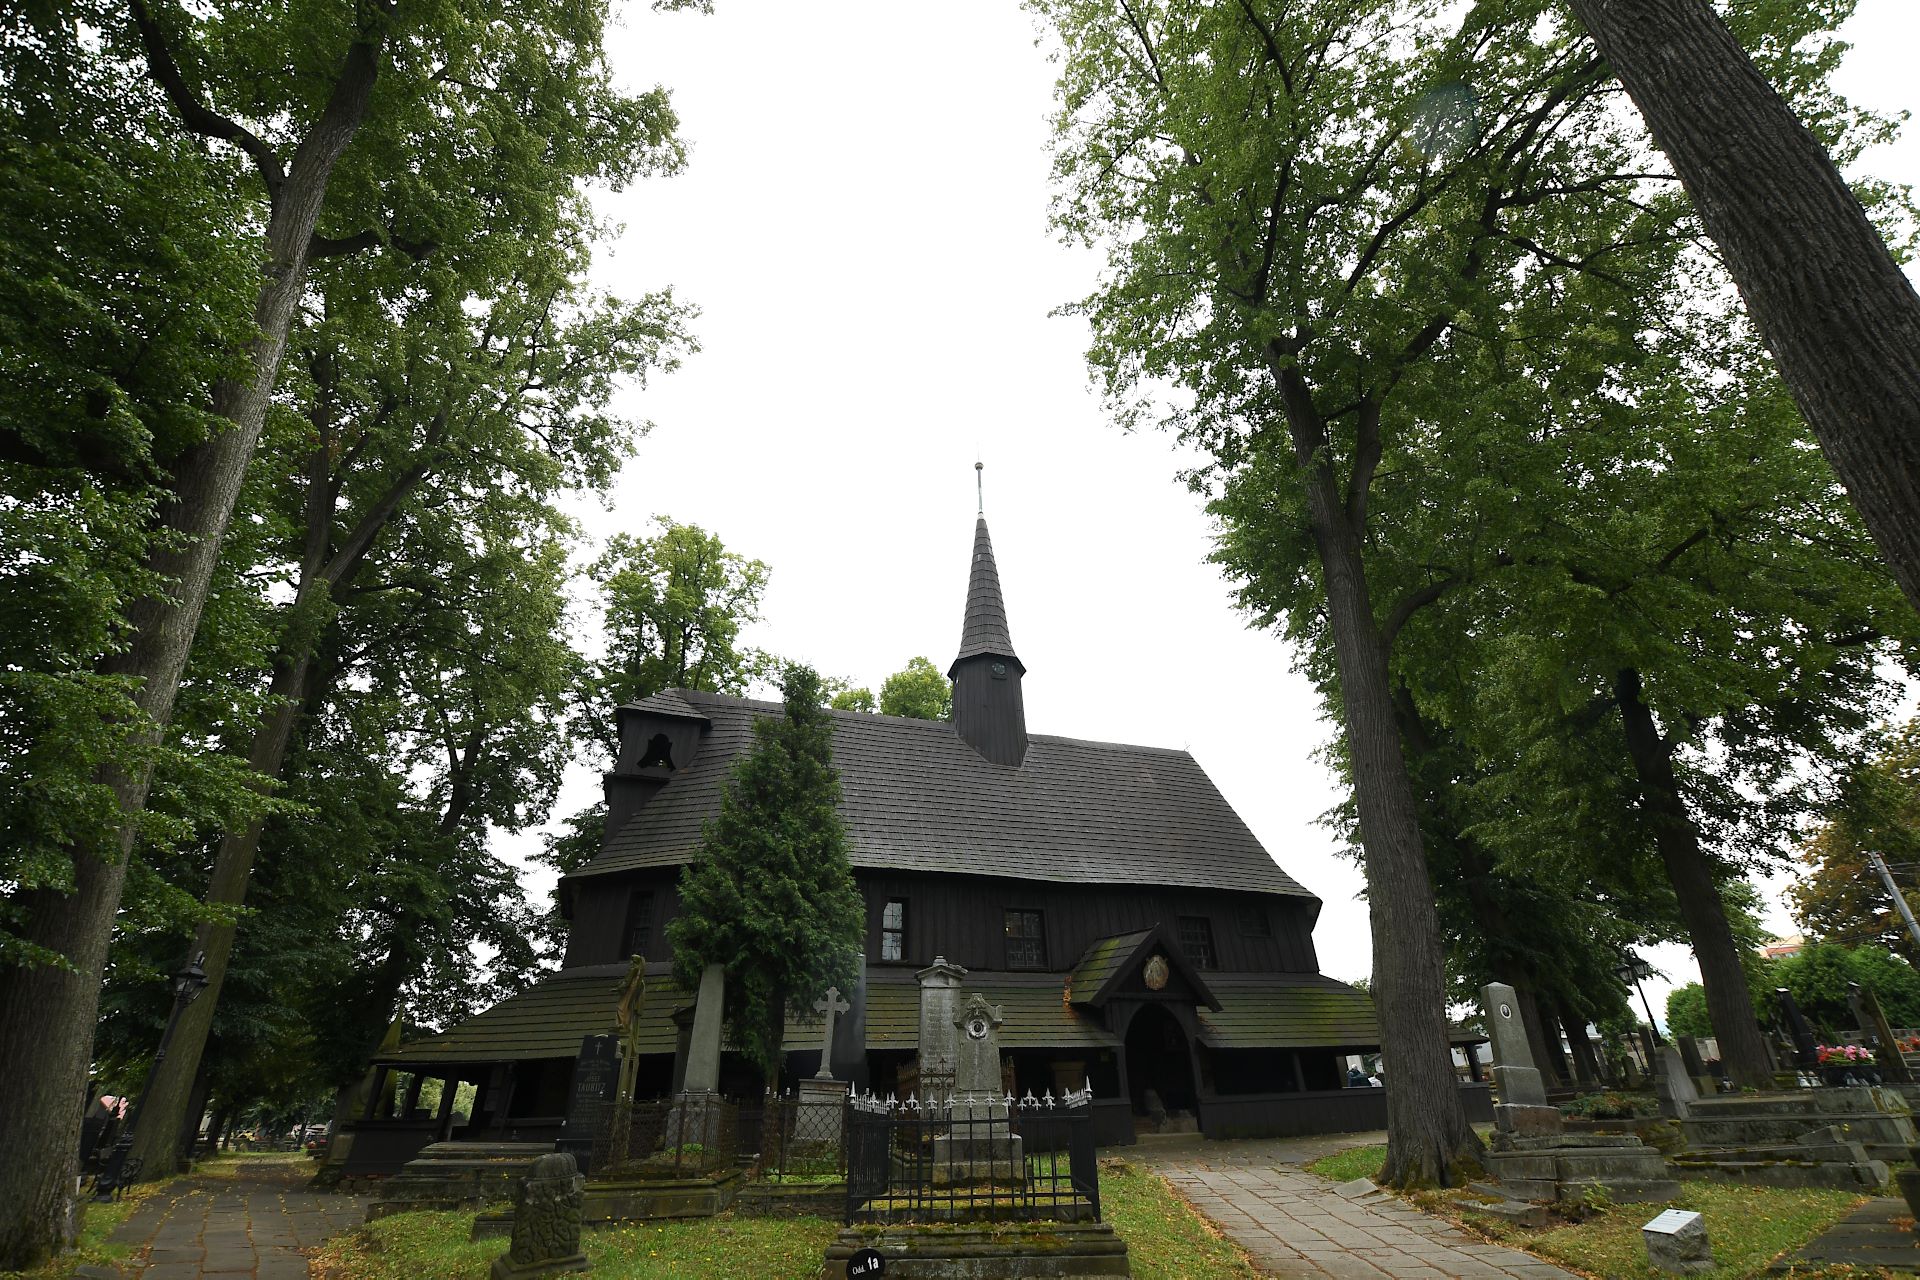 Holzkirche in Broumov